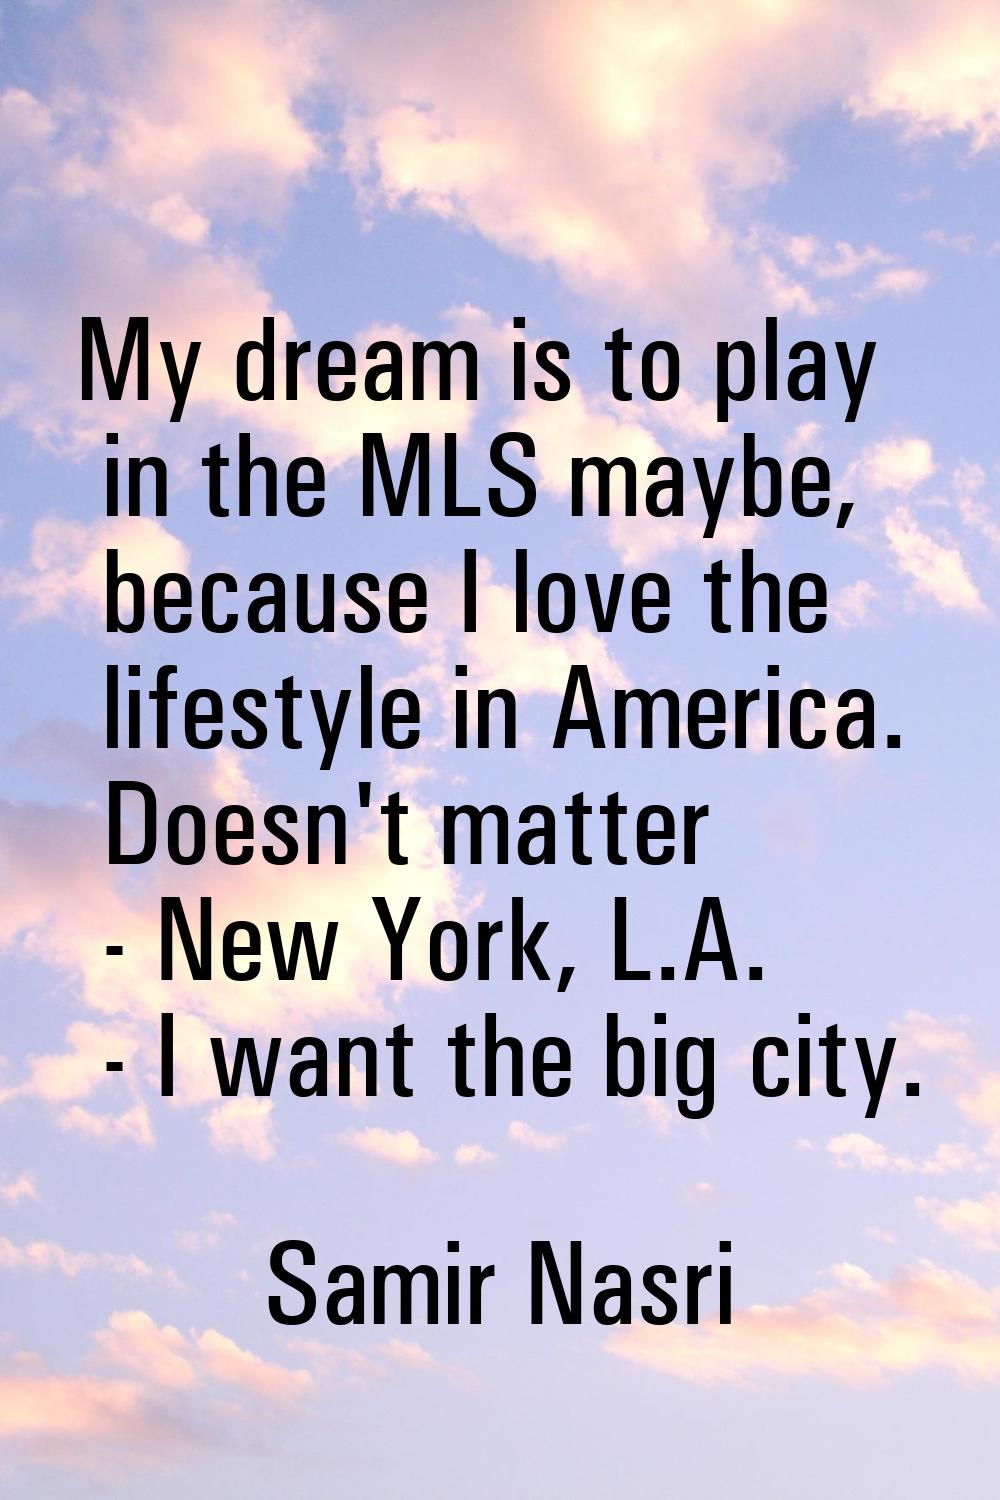 My dream is to play in the MLS maybe, because I love the lifestyle in America. Doesn't matter - New